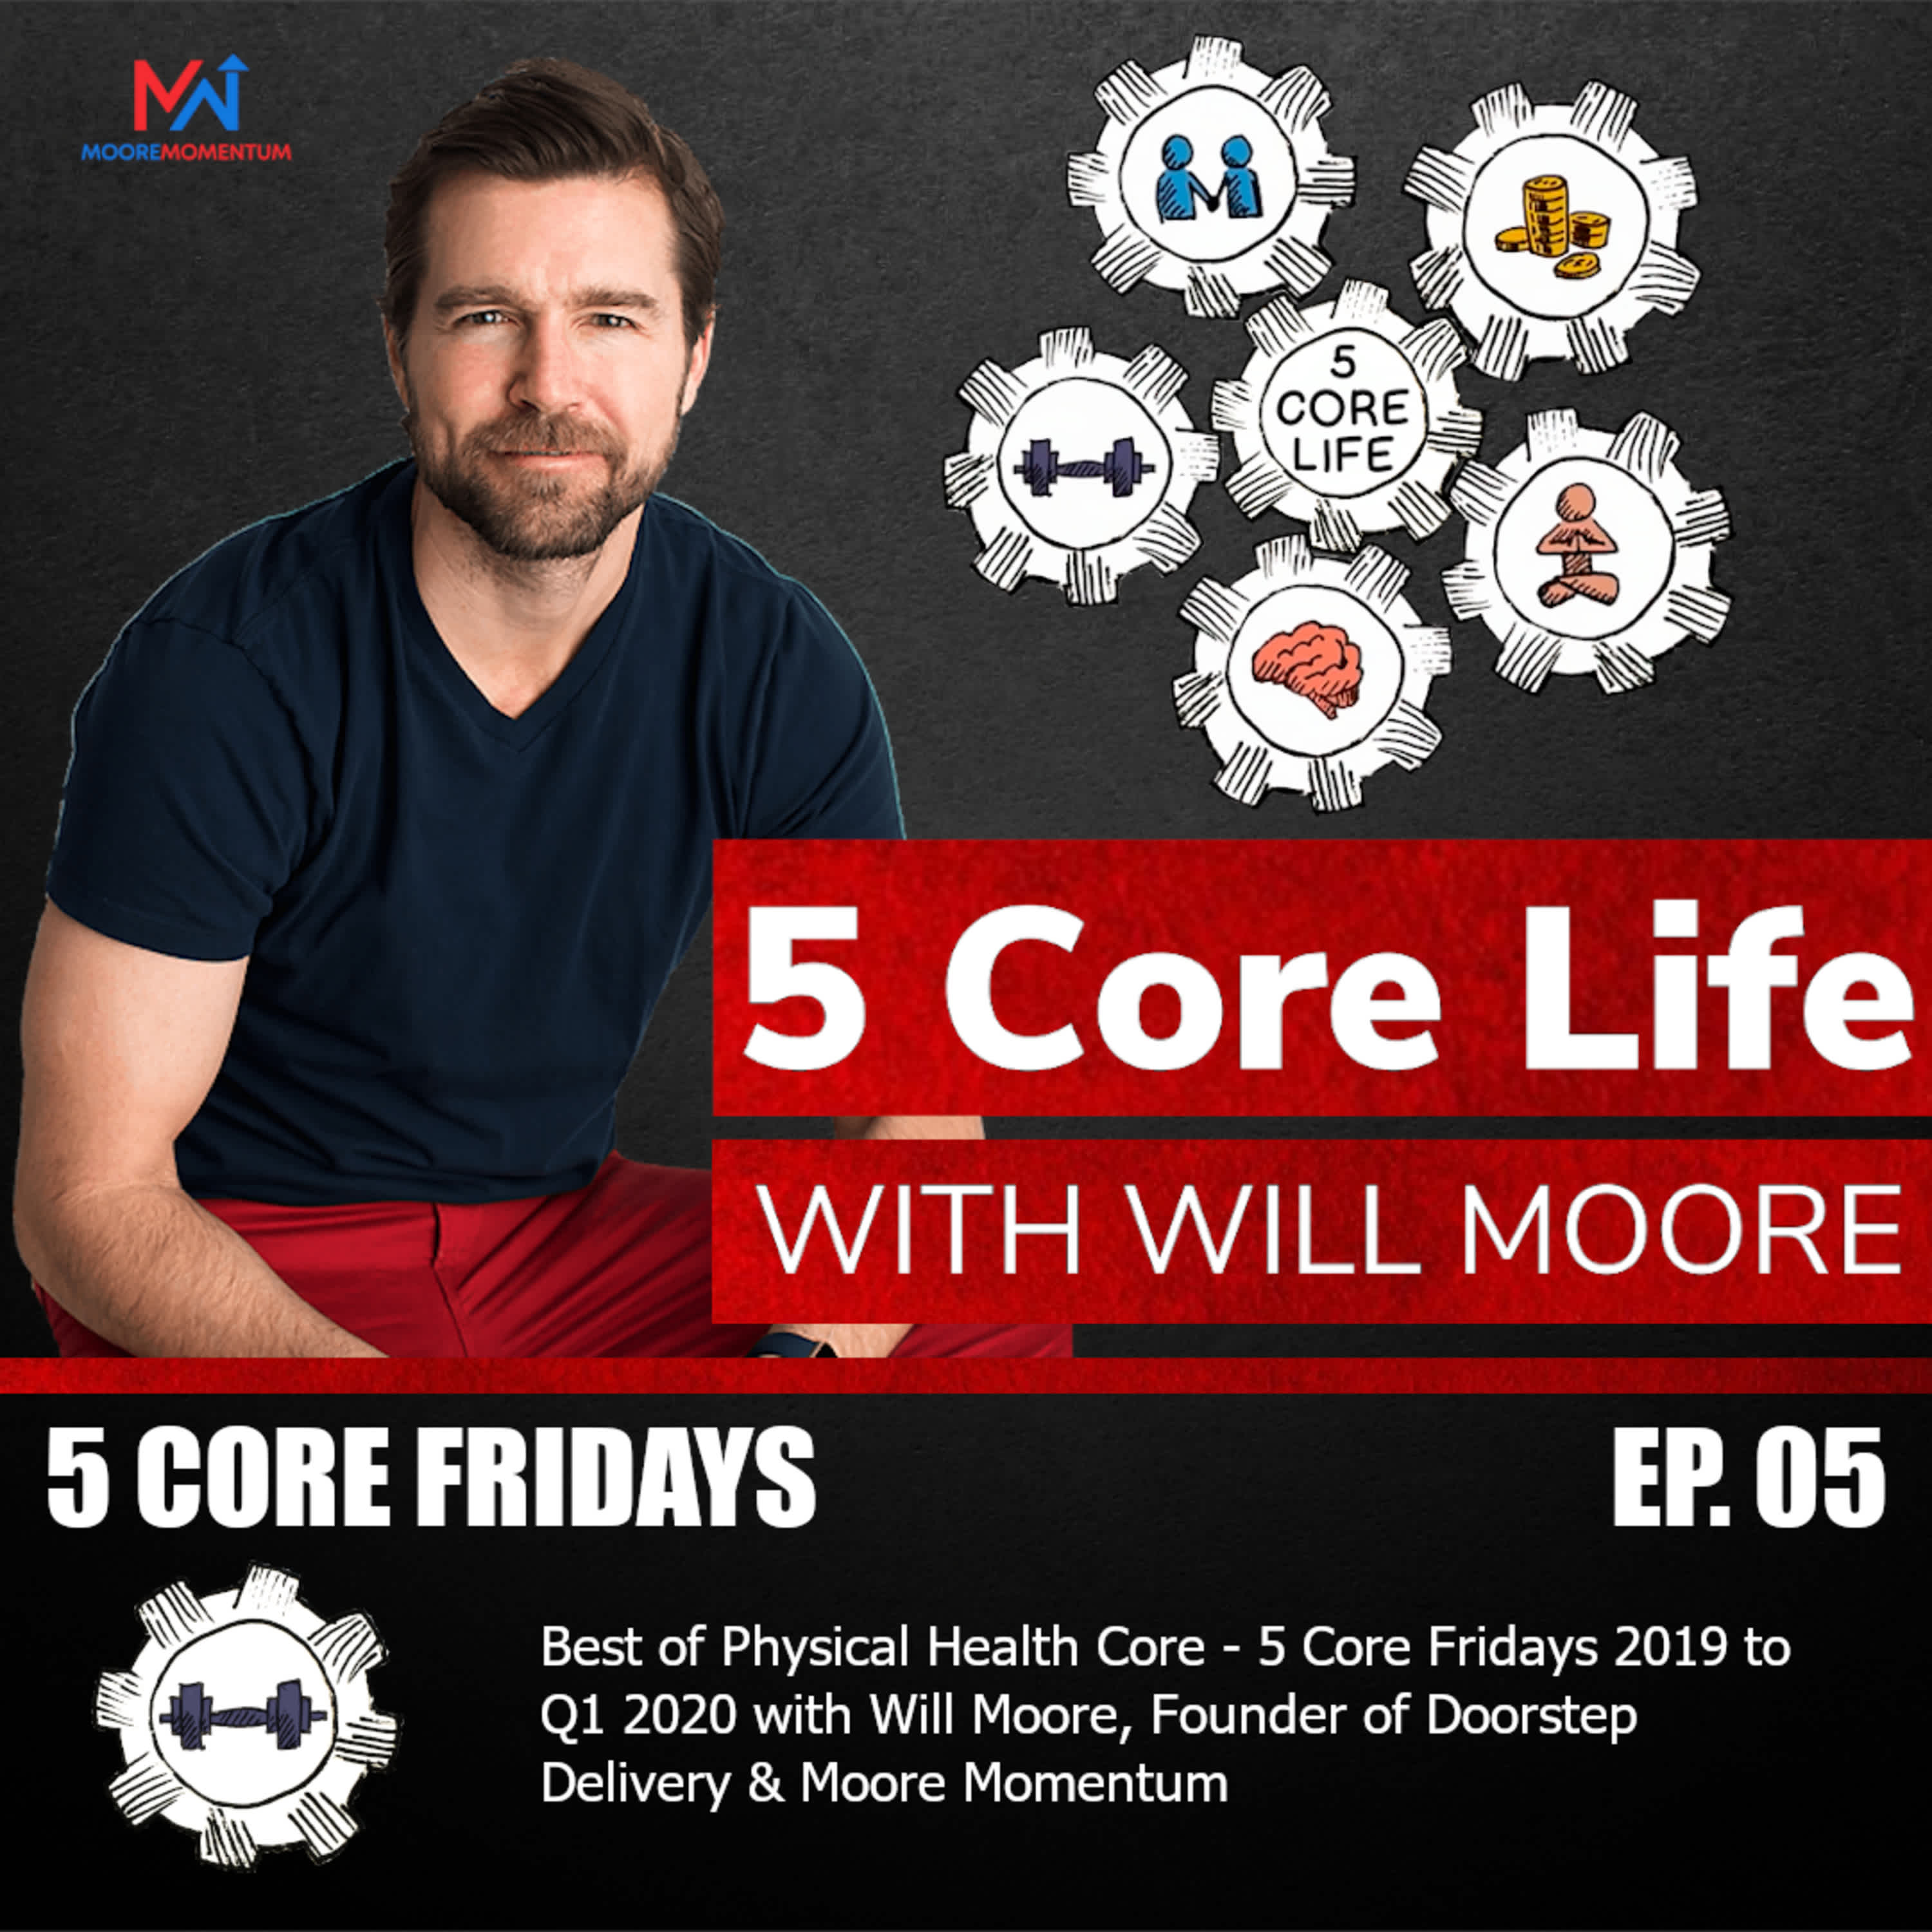 Best of Physical Health Core - 5 Core Fridays 2019 to Q1 2020 with Will Moore, Founder of Doorstep Delivery & Moore Momentum